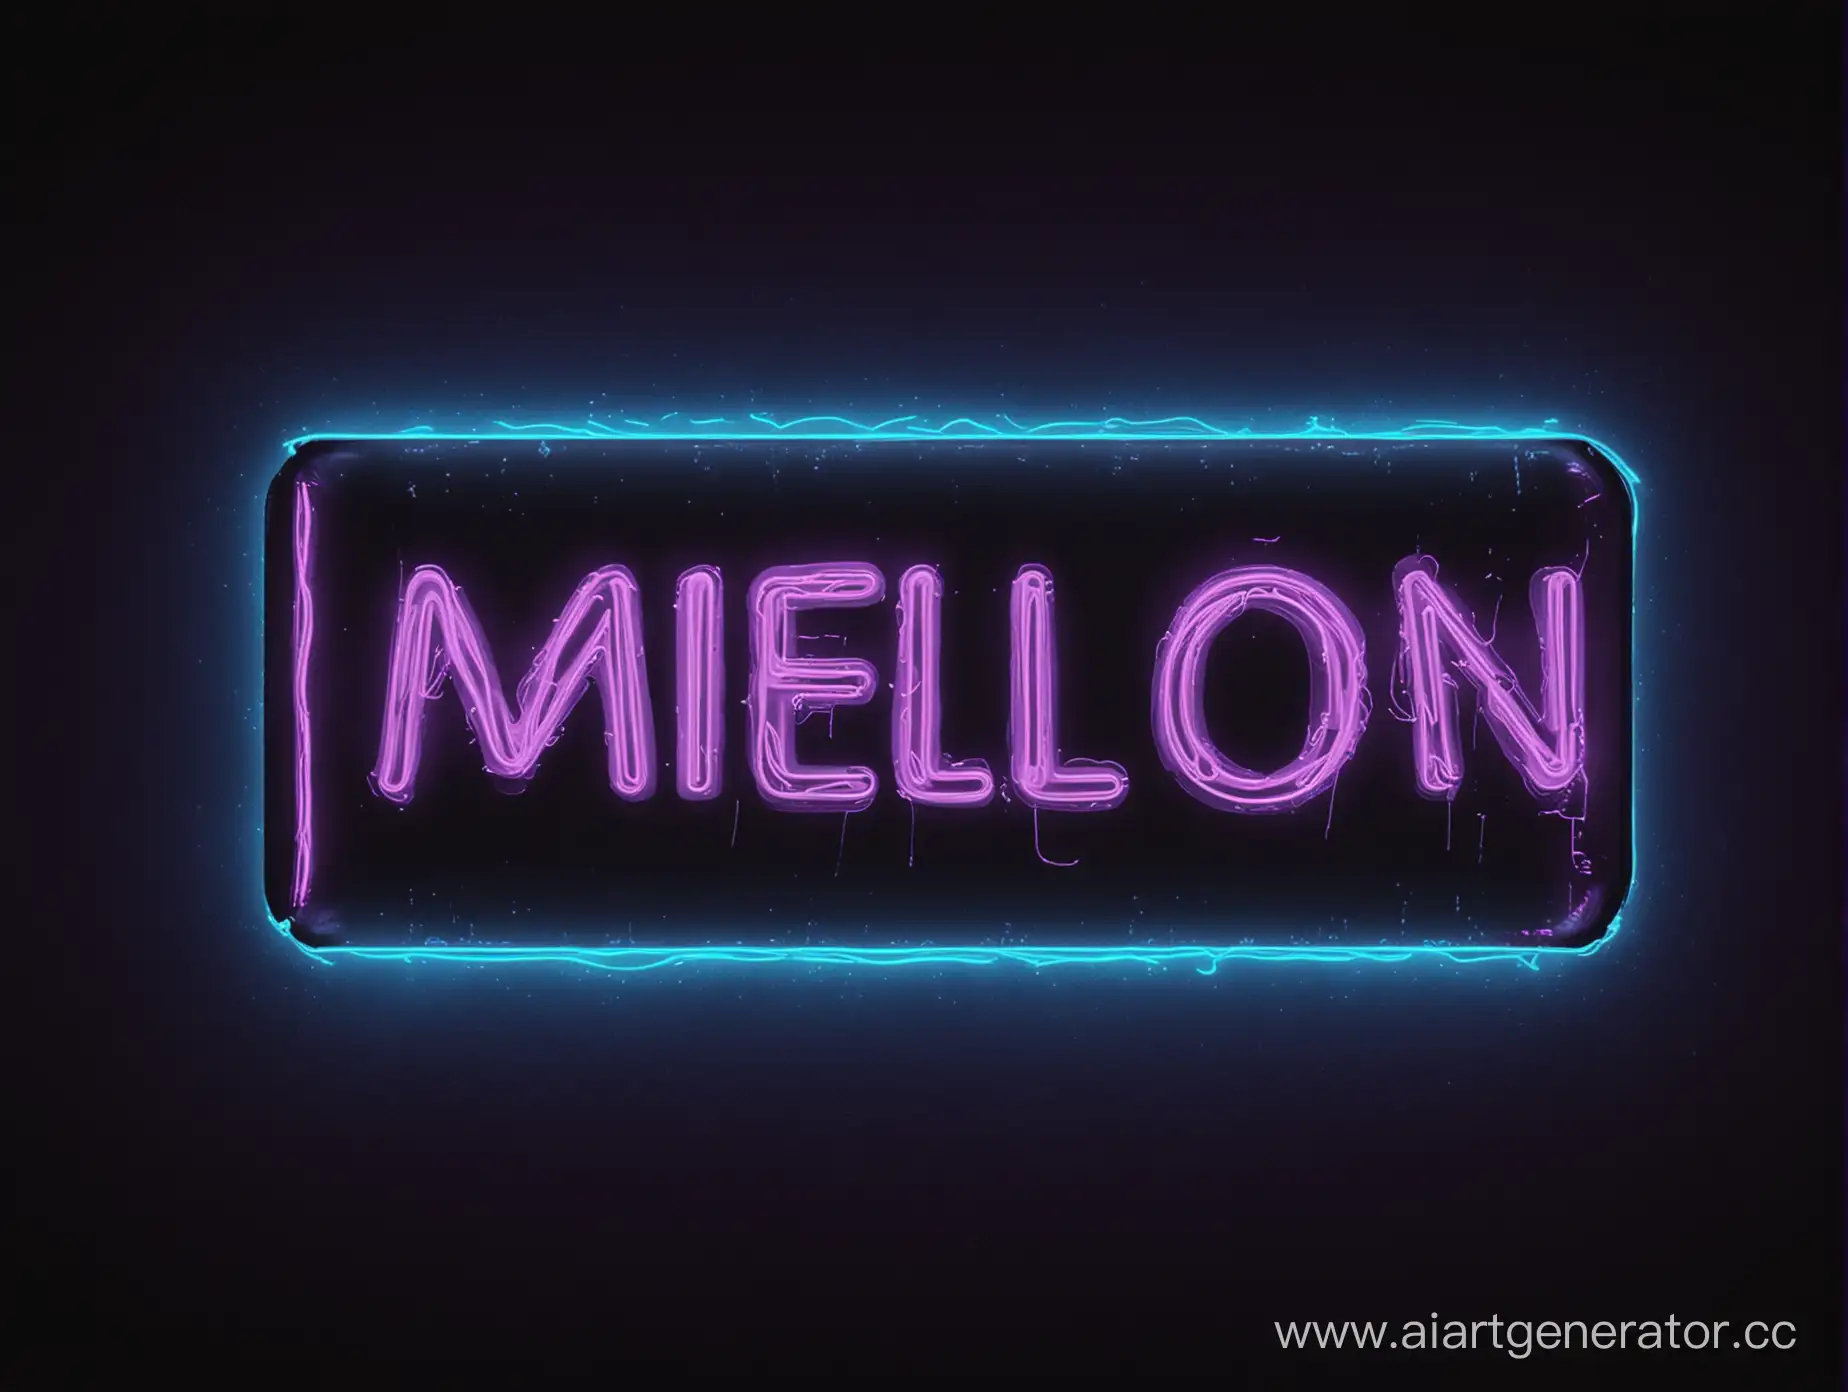 Melon-DF-Text-in-Blue-Neon-on-Black-Background-with-Purple-Neon-Accents